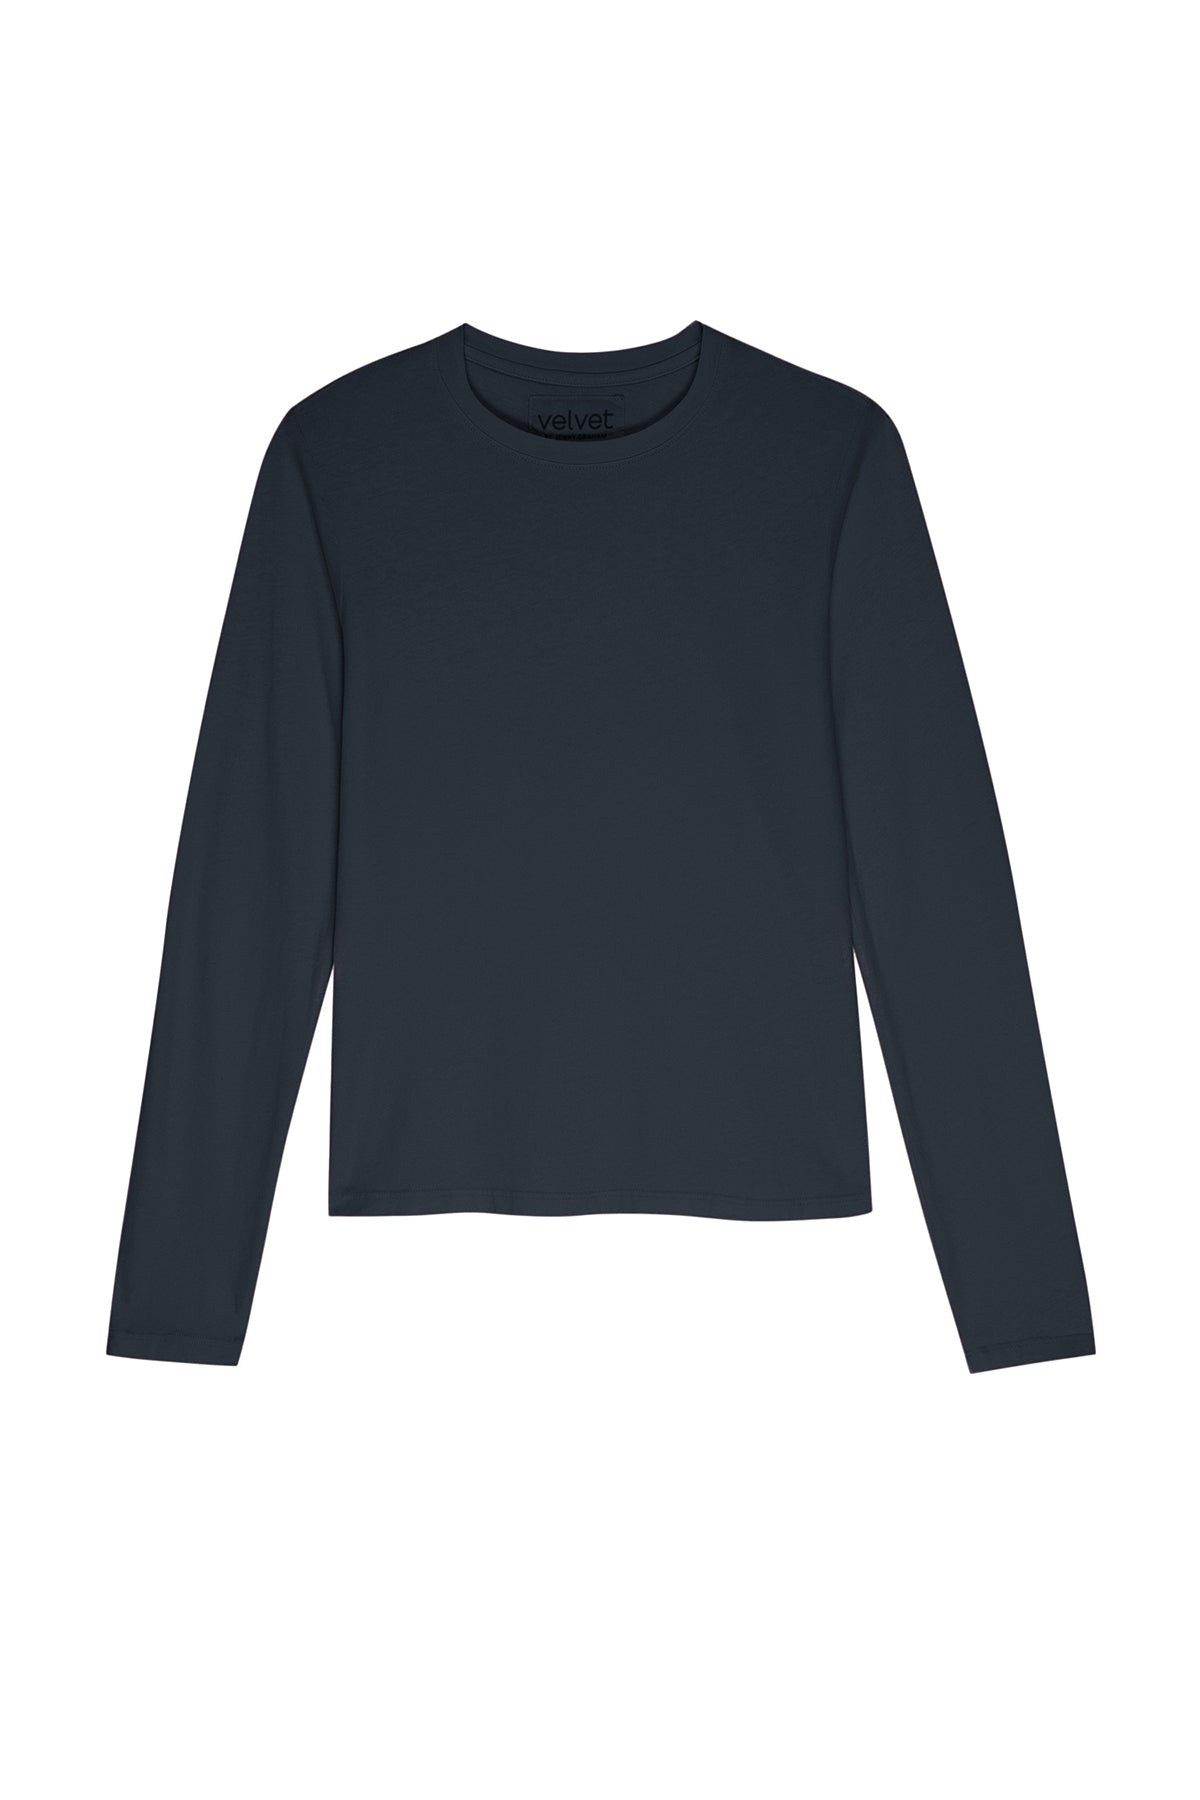 a black long-sleeved cropped VICENTE TEE by Velvet by Jenny Graham.-24427644223681